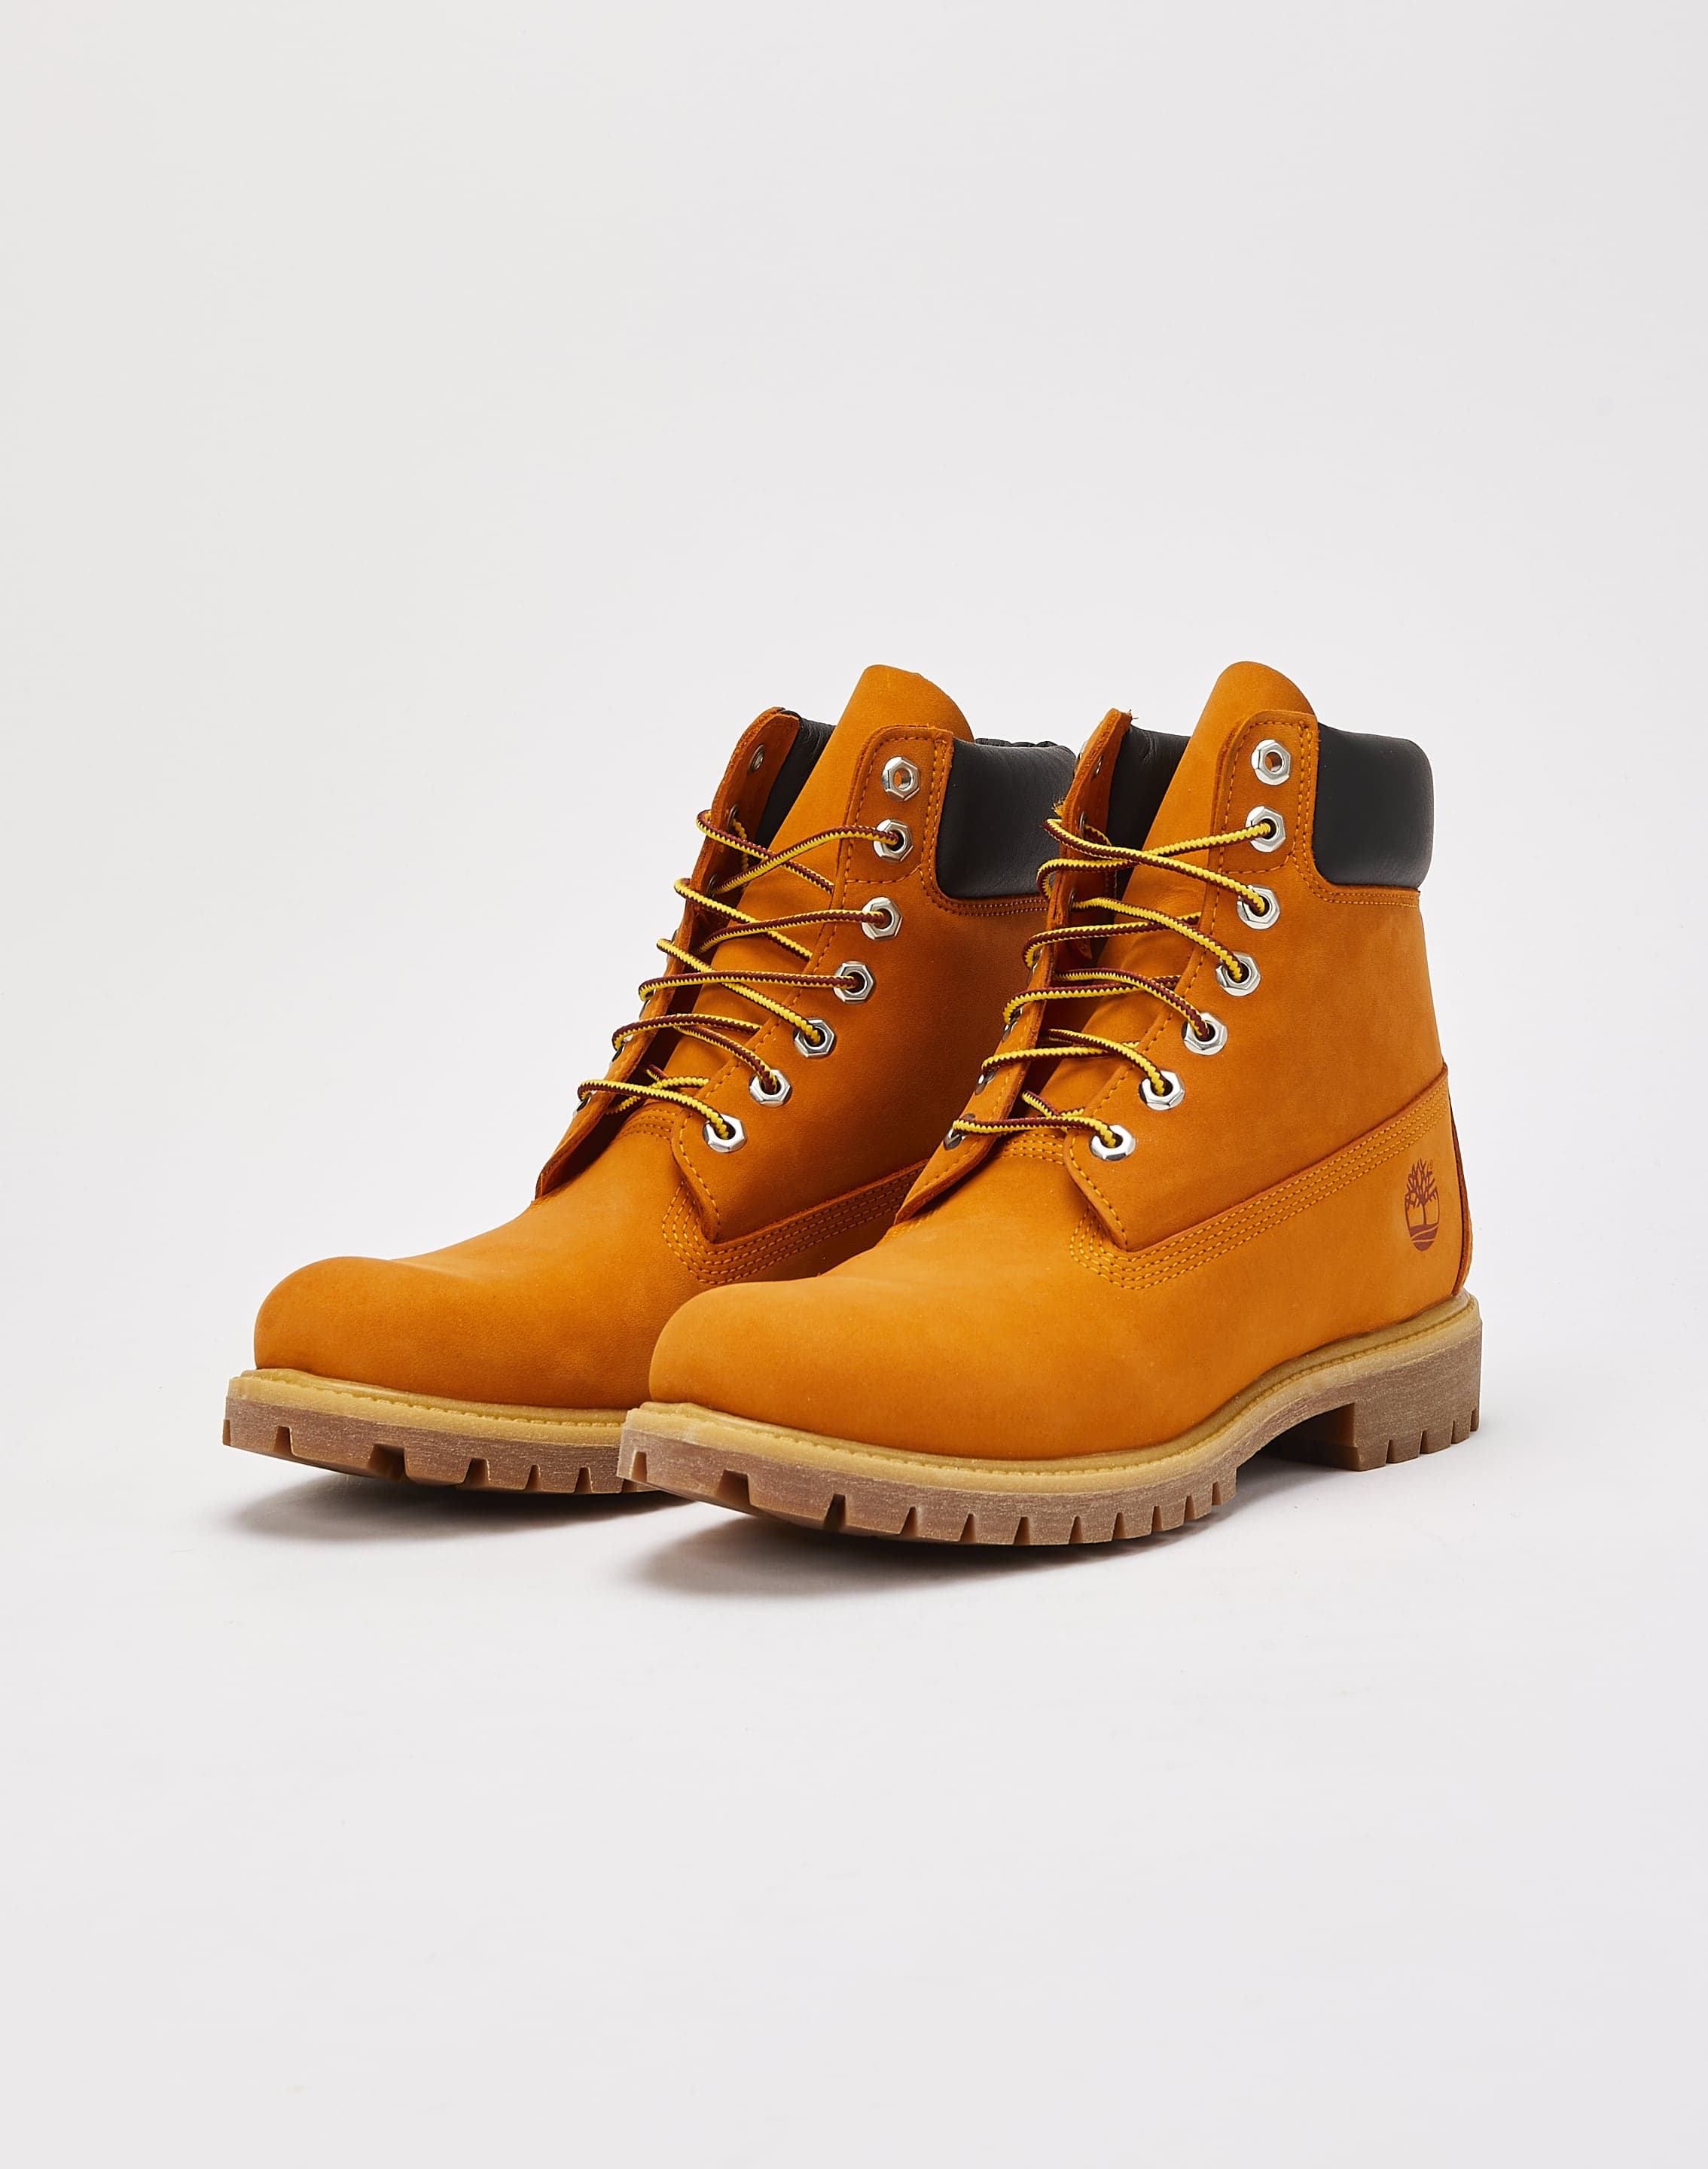 Timberland 6-Inch Premium Waterproof Boots 'Cheddar' – DTLR